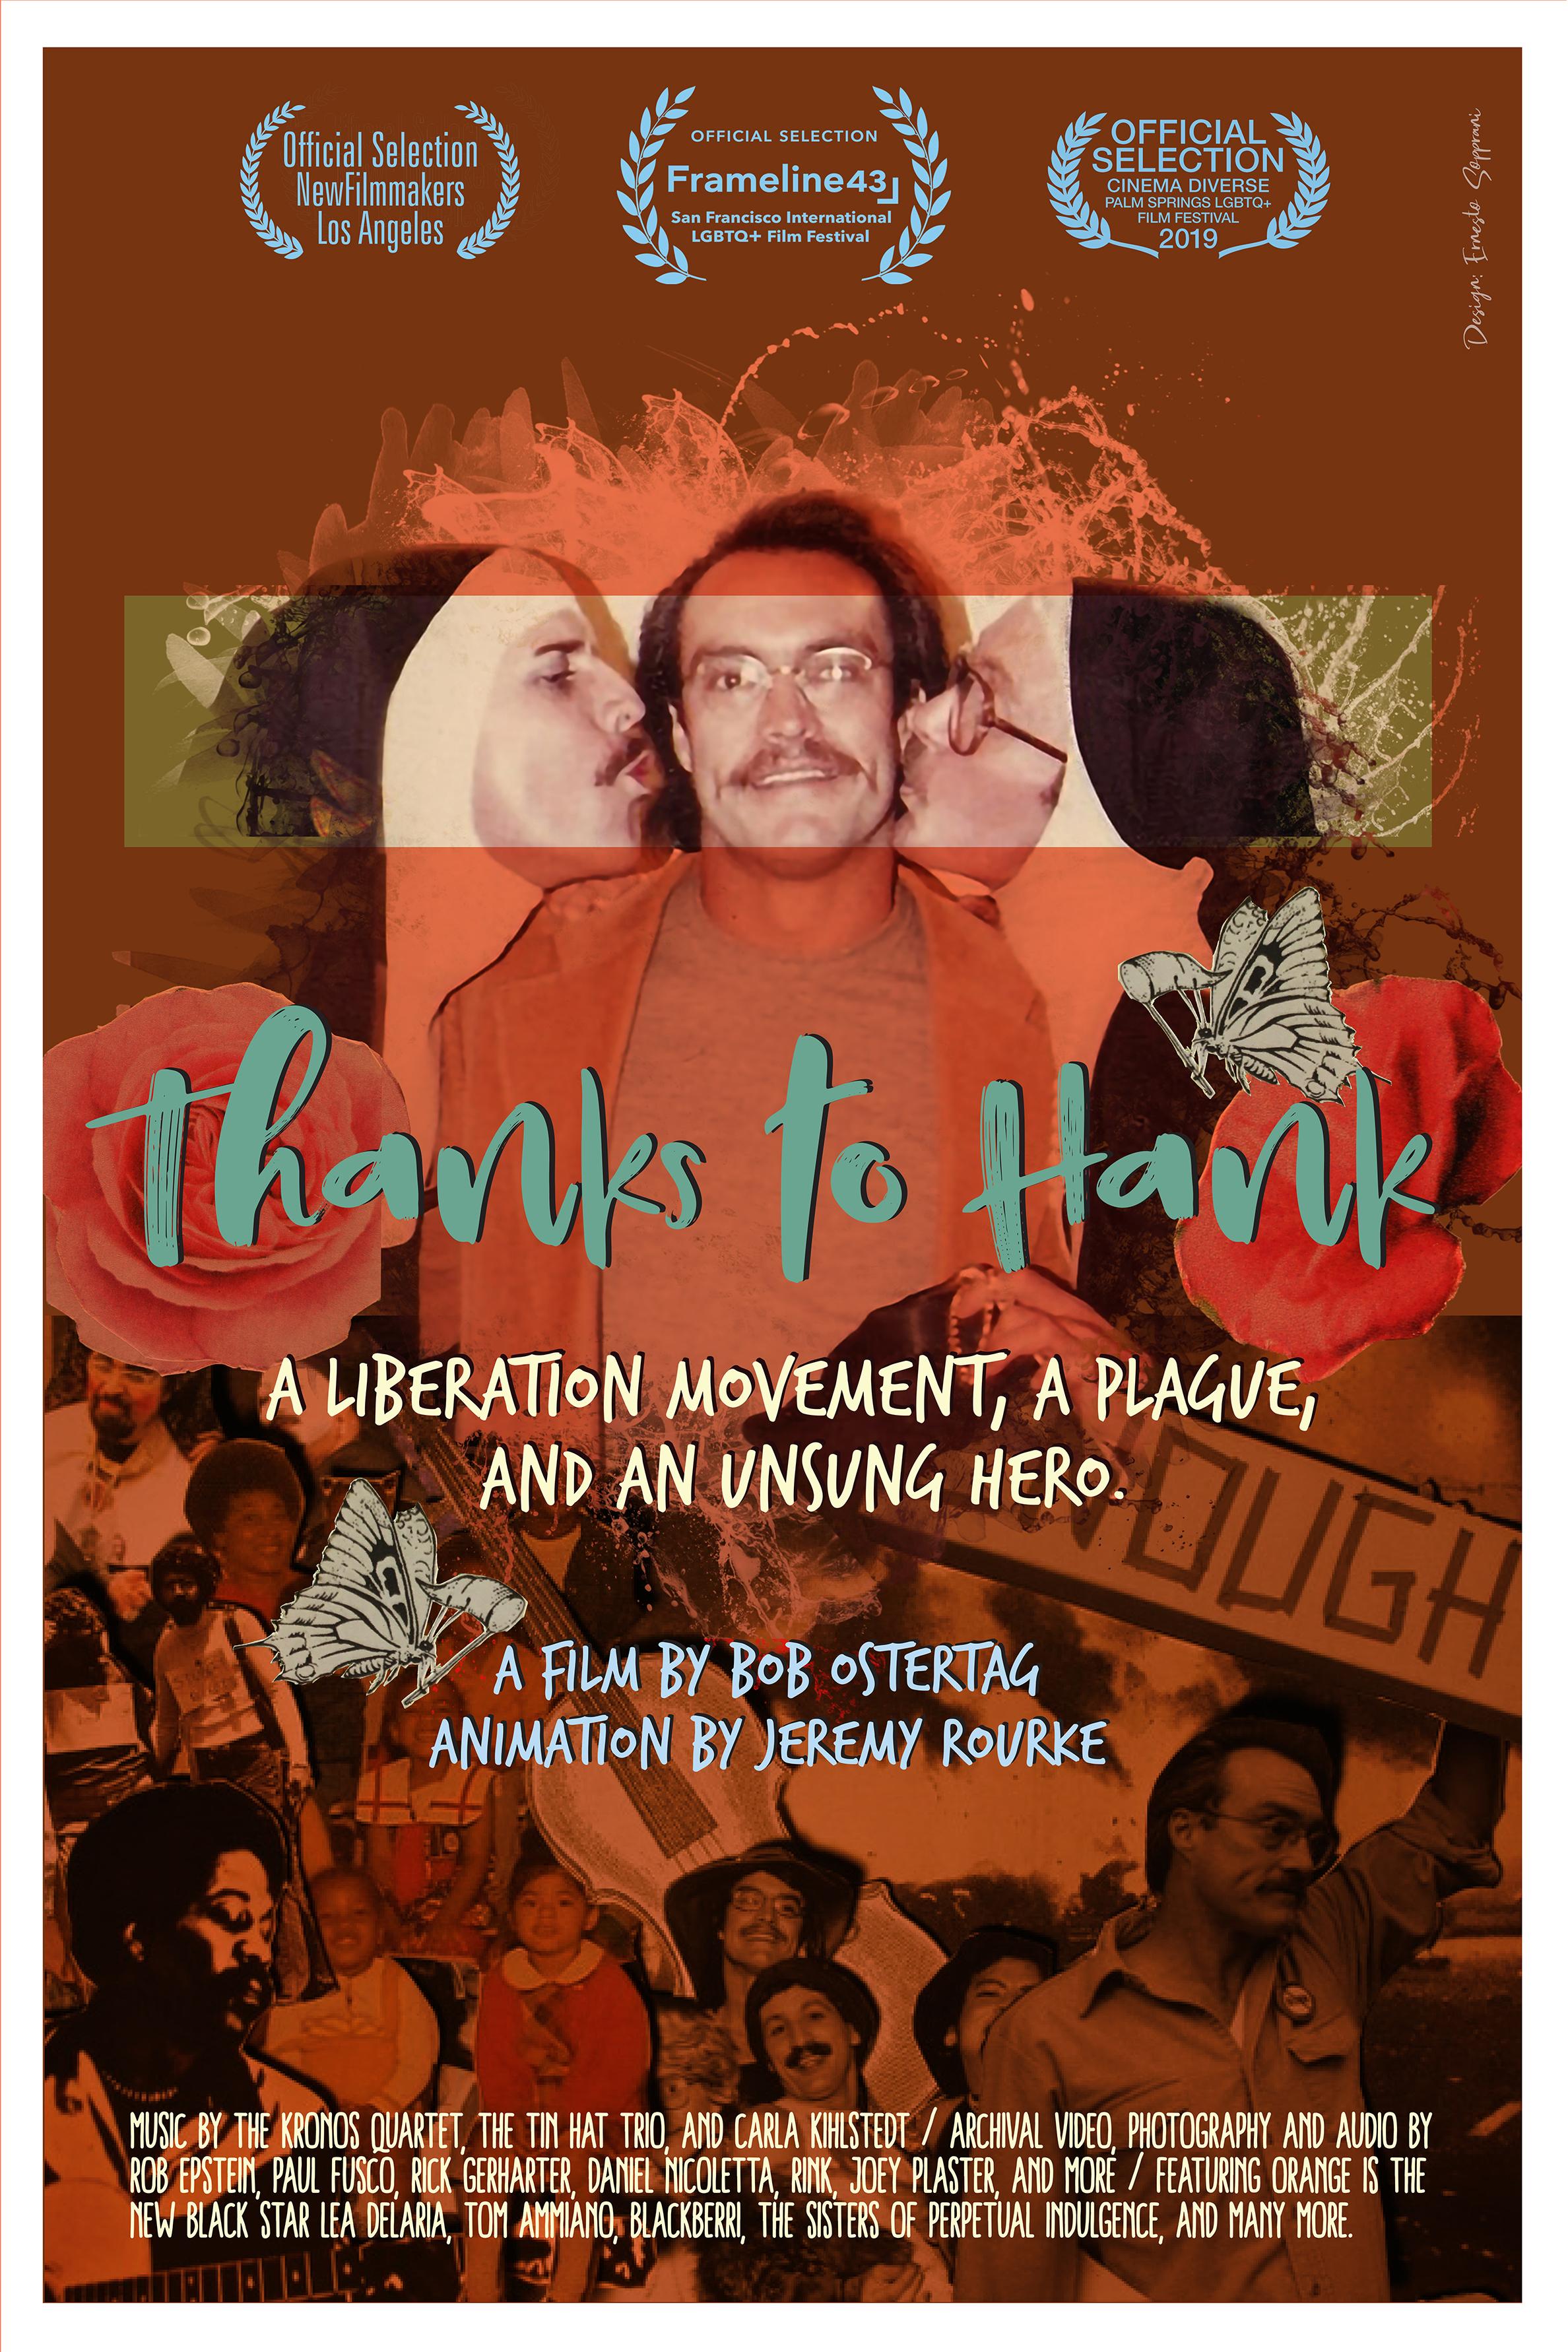 Thanks to Hank: A Liberation Movement, a Plague, and an Unsung Hero